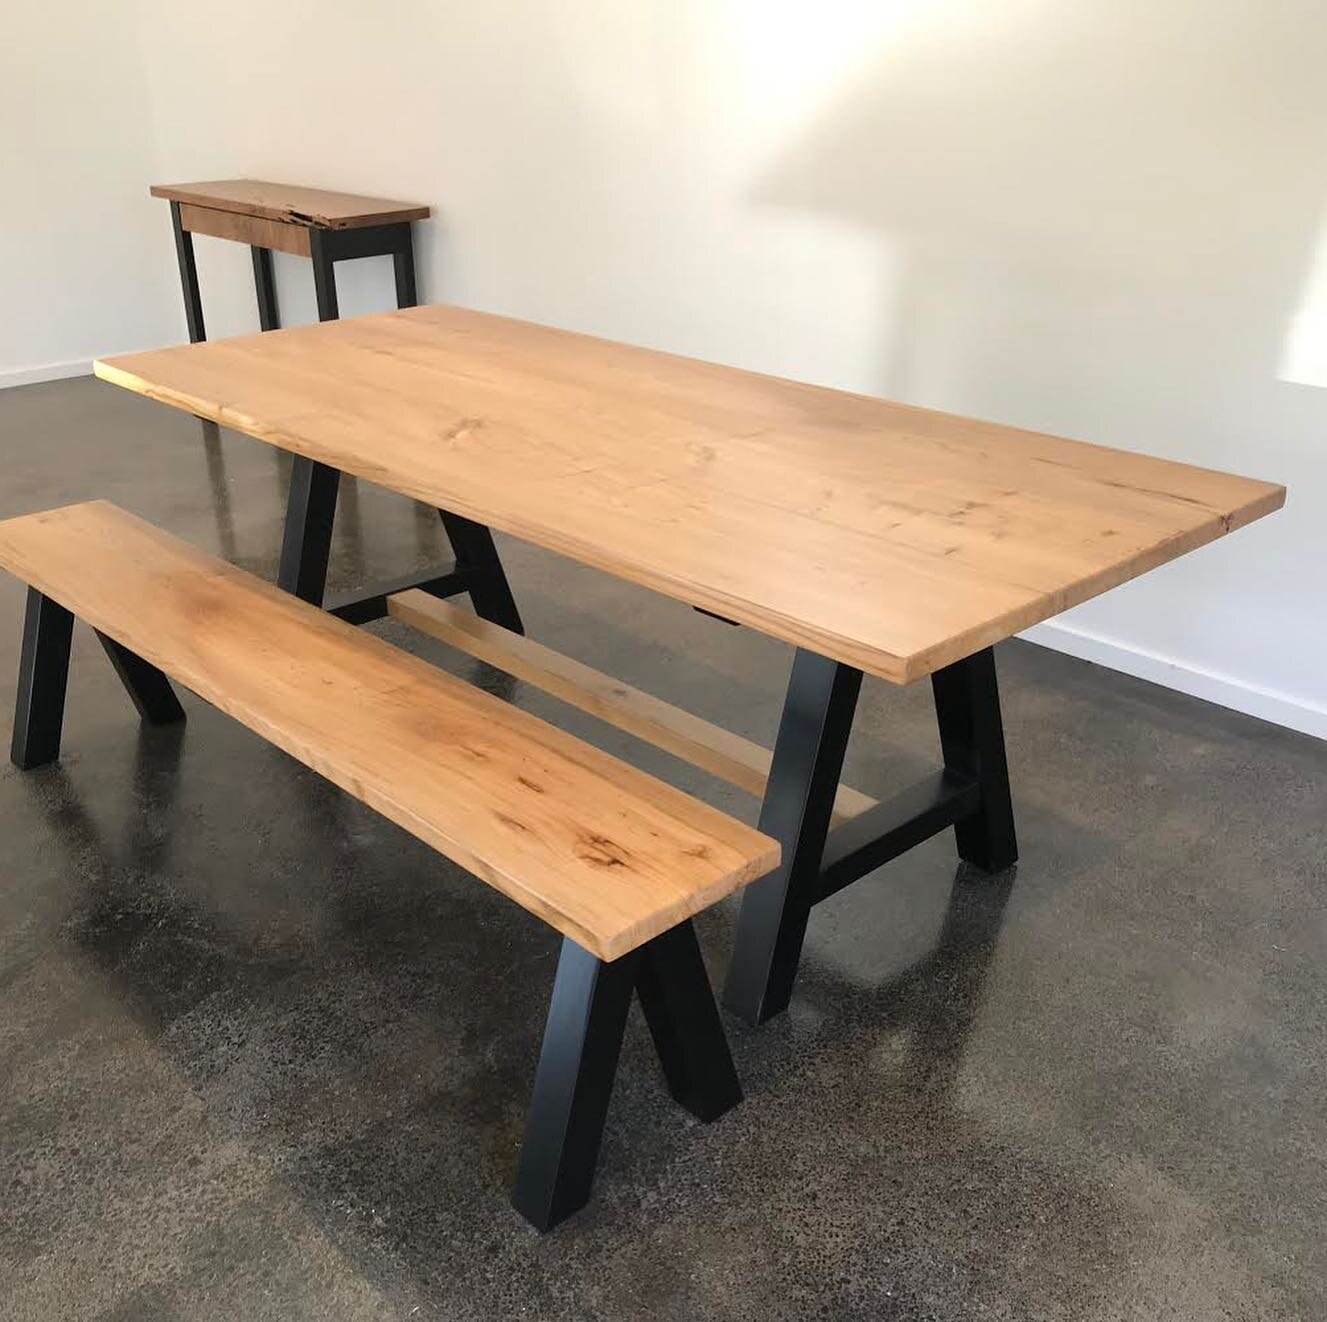 Having your own timber incorporated into a piece of bespoke furniture adds a personal touch that can not be replicated.

Our client was envisioning a contemporary table with bench seats that could seat eight people. They had also completed a renovati